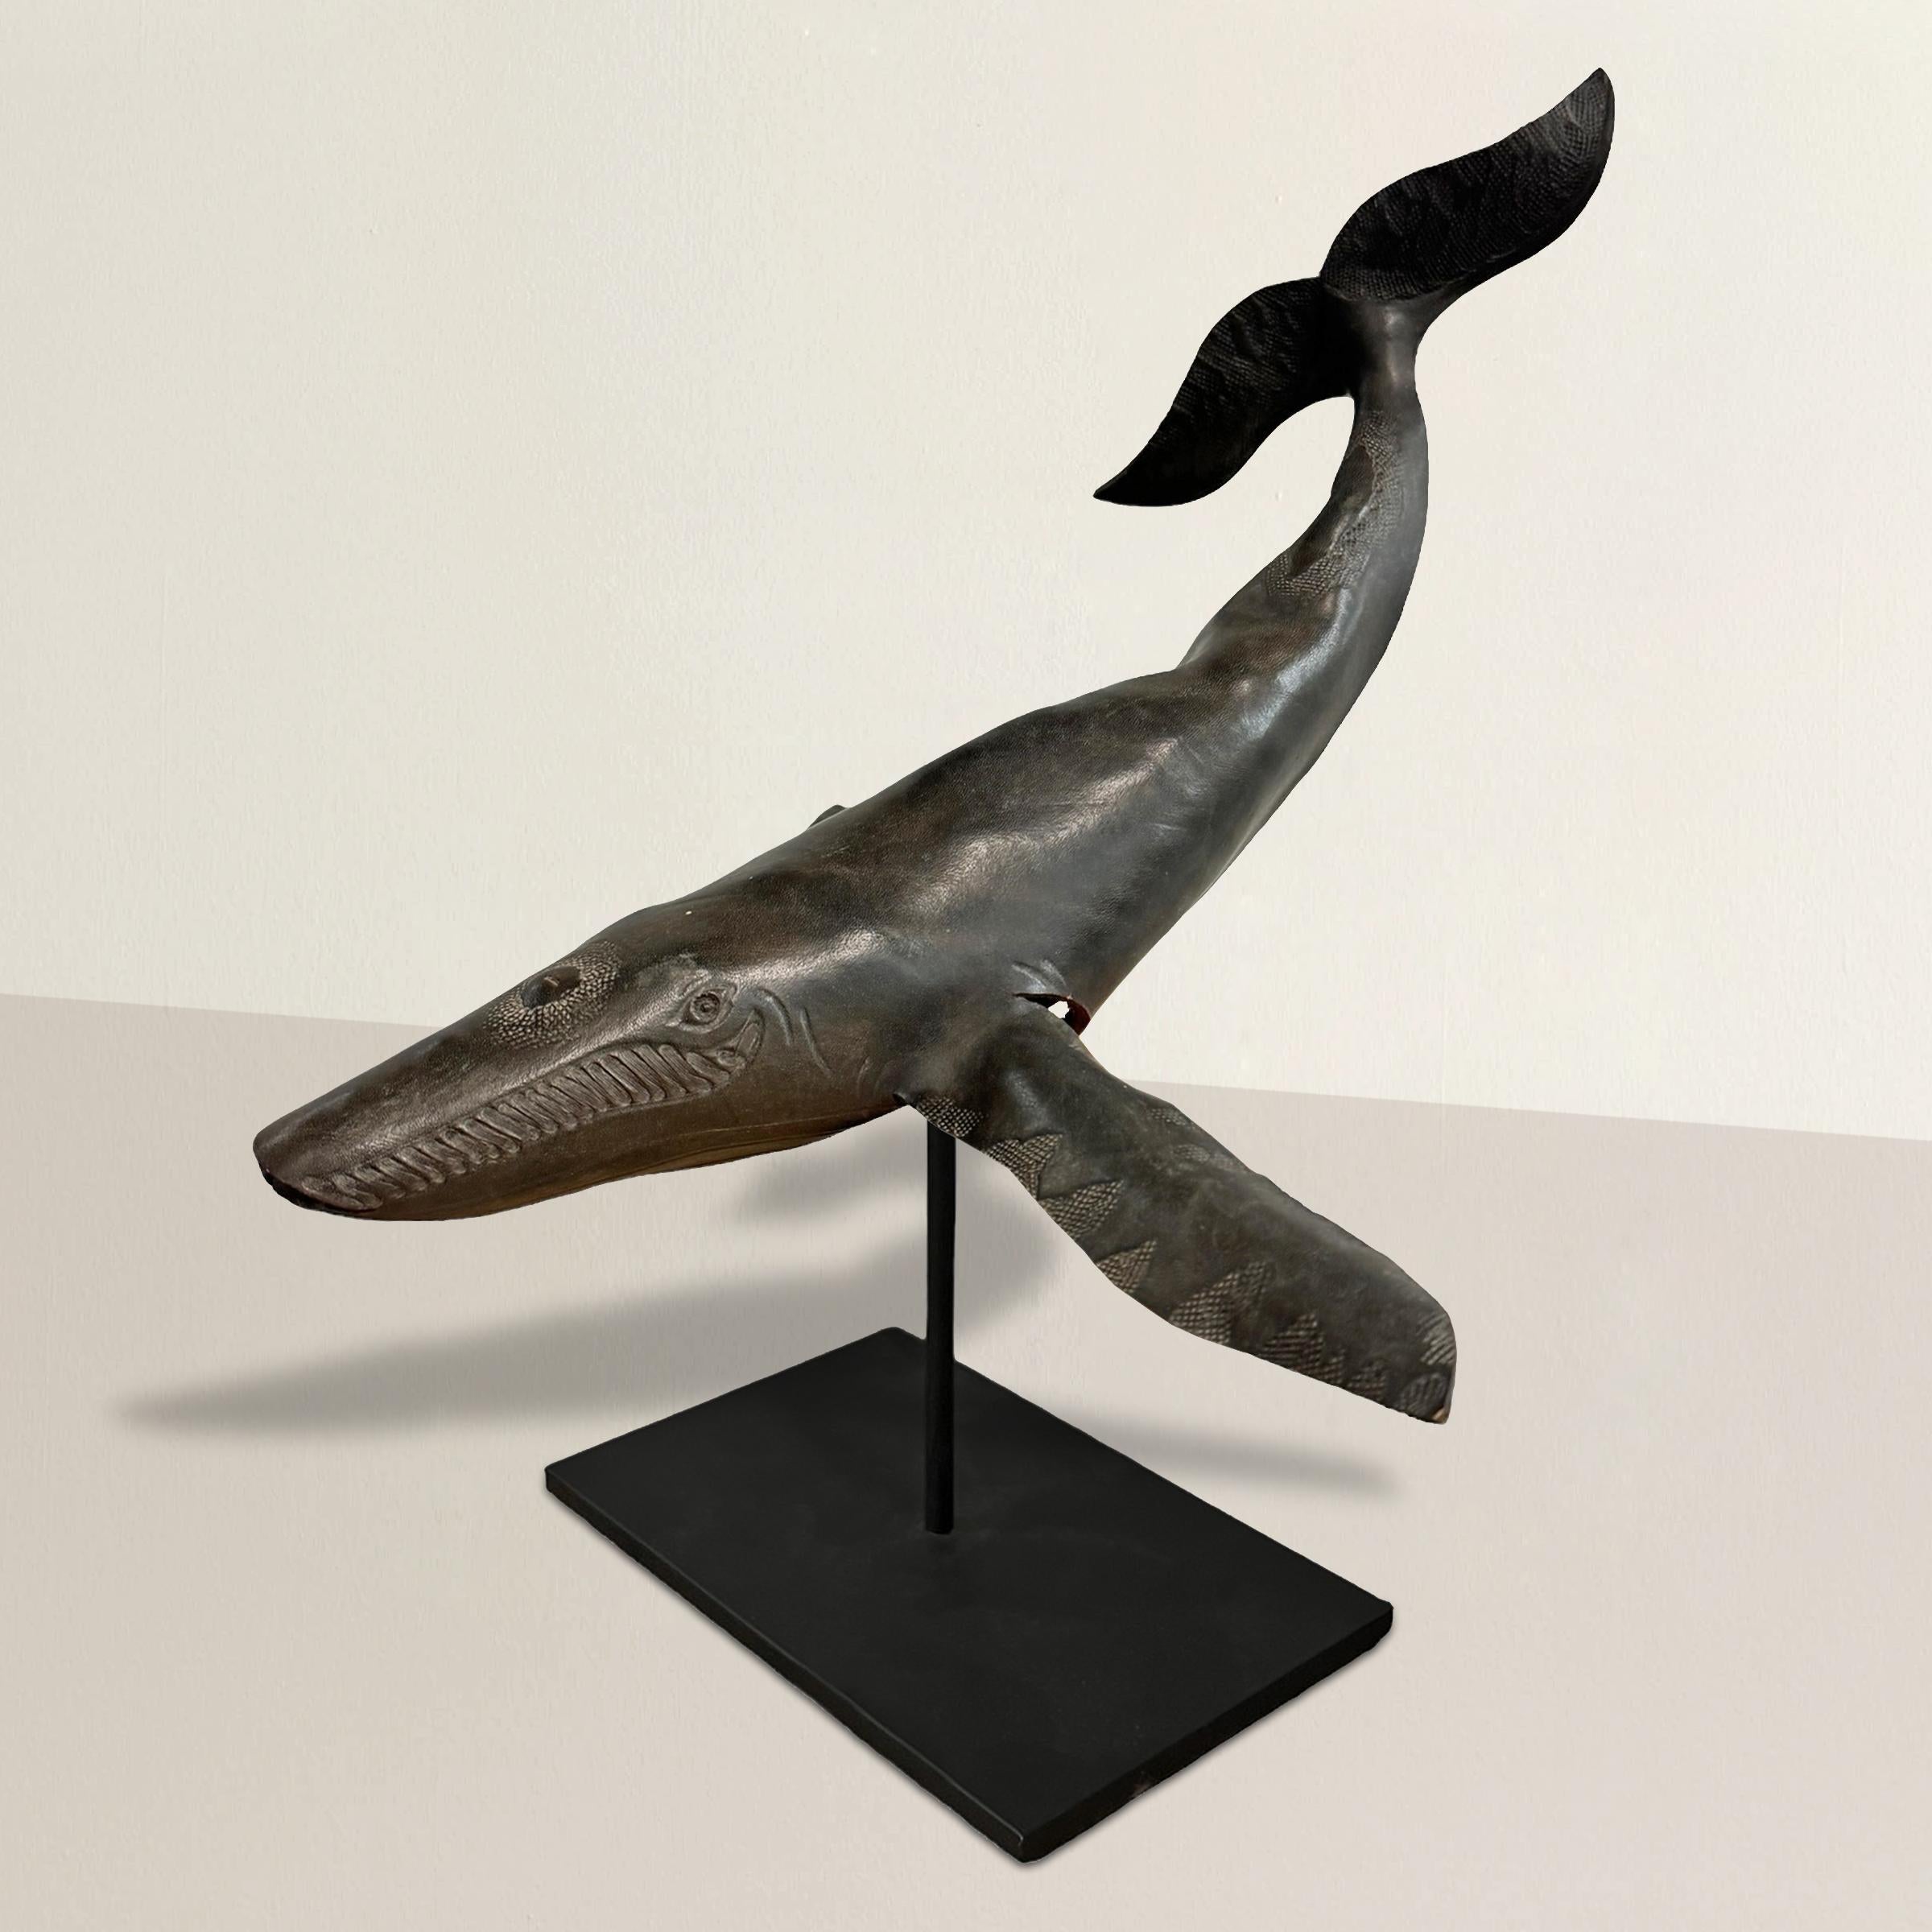 This mid-20th-century American hand-crafted leather humpback whale, found in one of Oregon's picturesque coastal towns, is a stunning example of traditional craftsmanship and creativity. Expertly molded by hand, the dimensional body of the whale